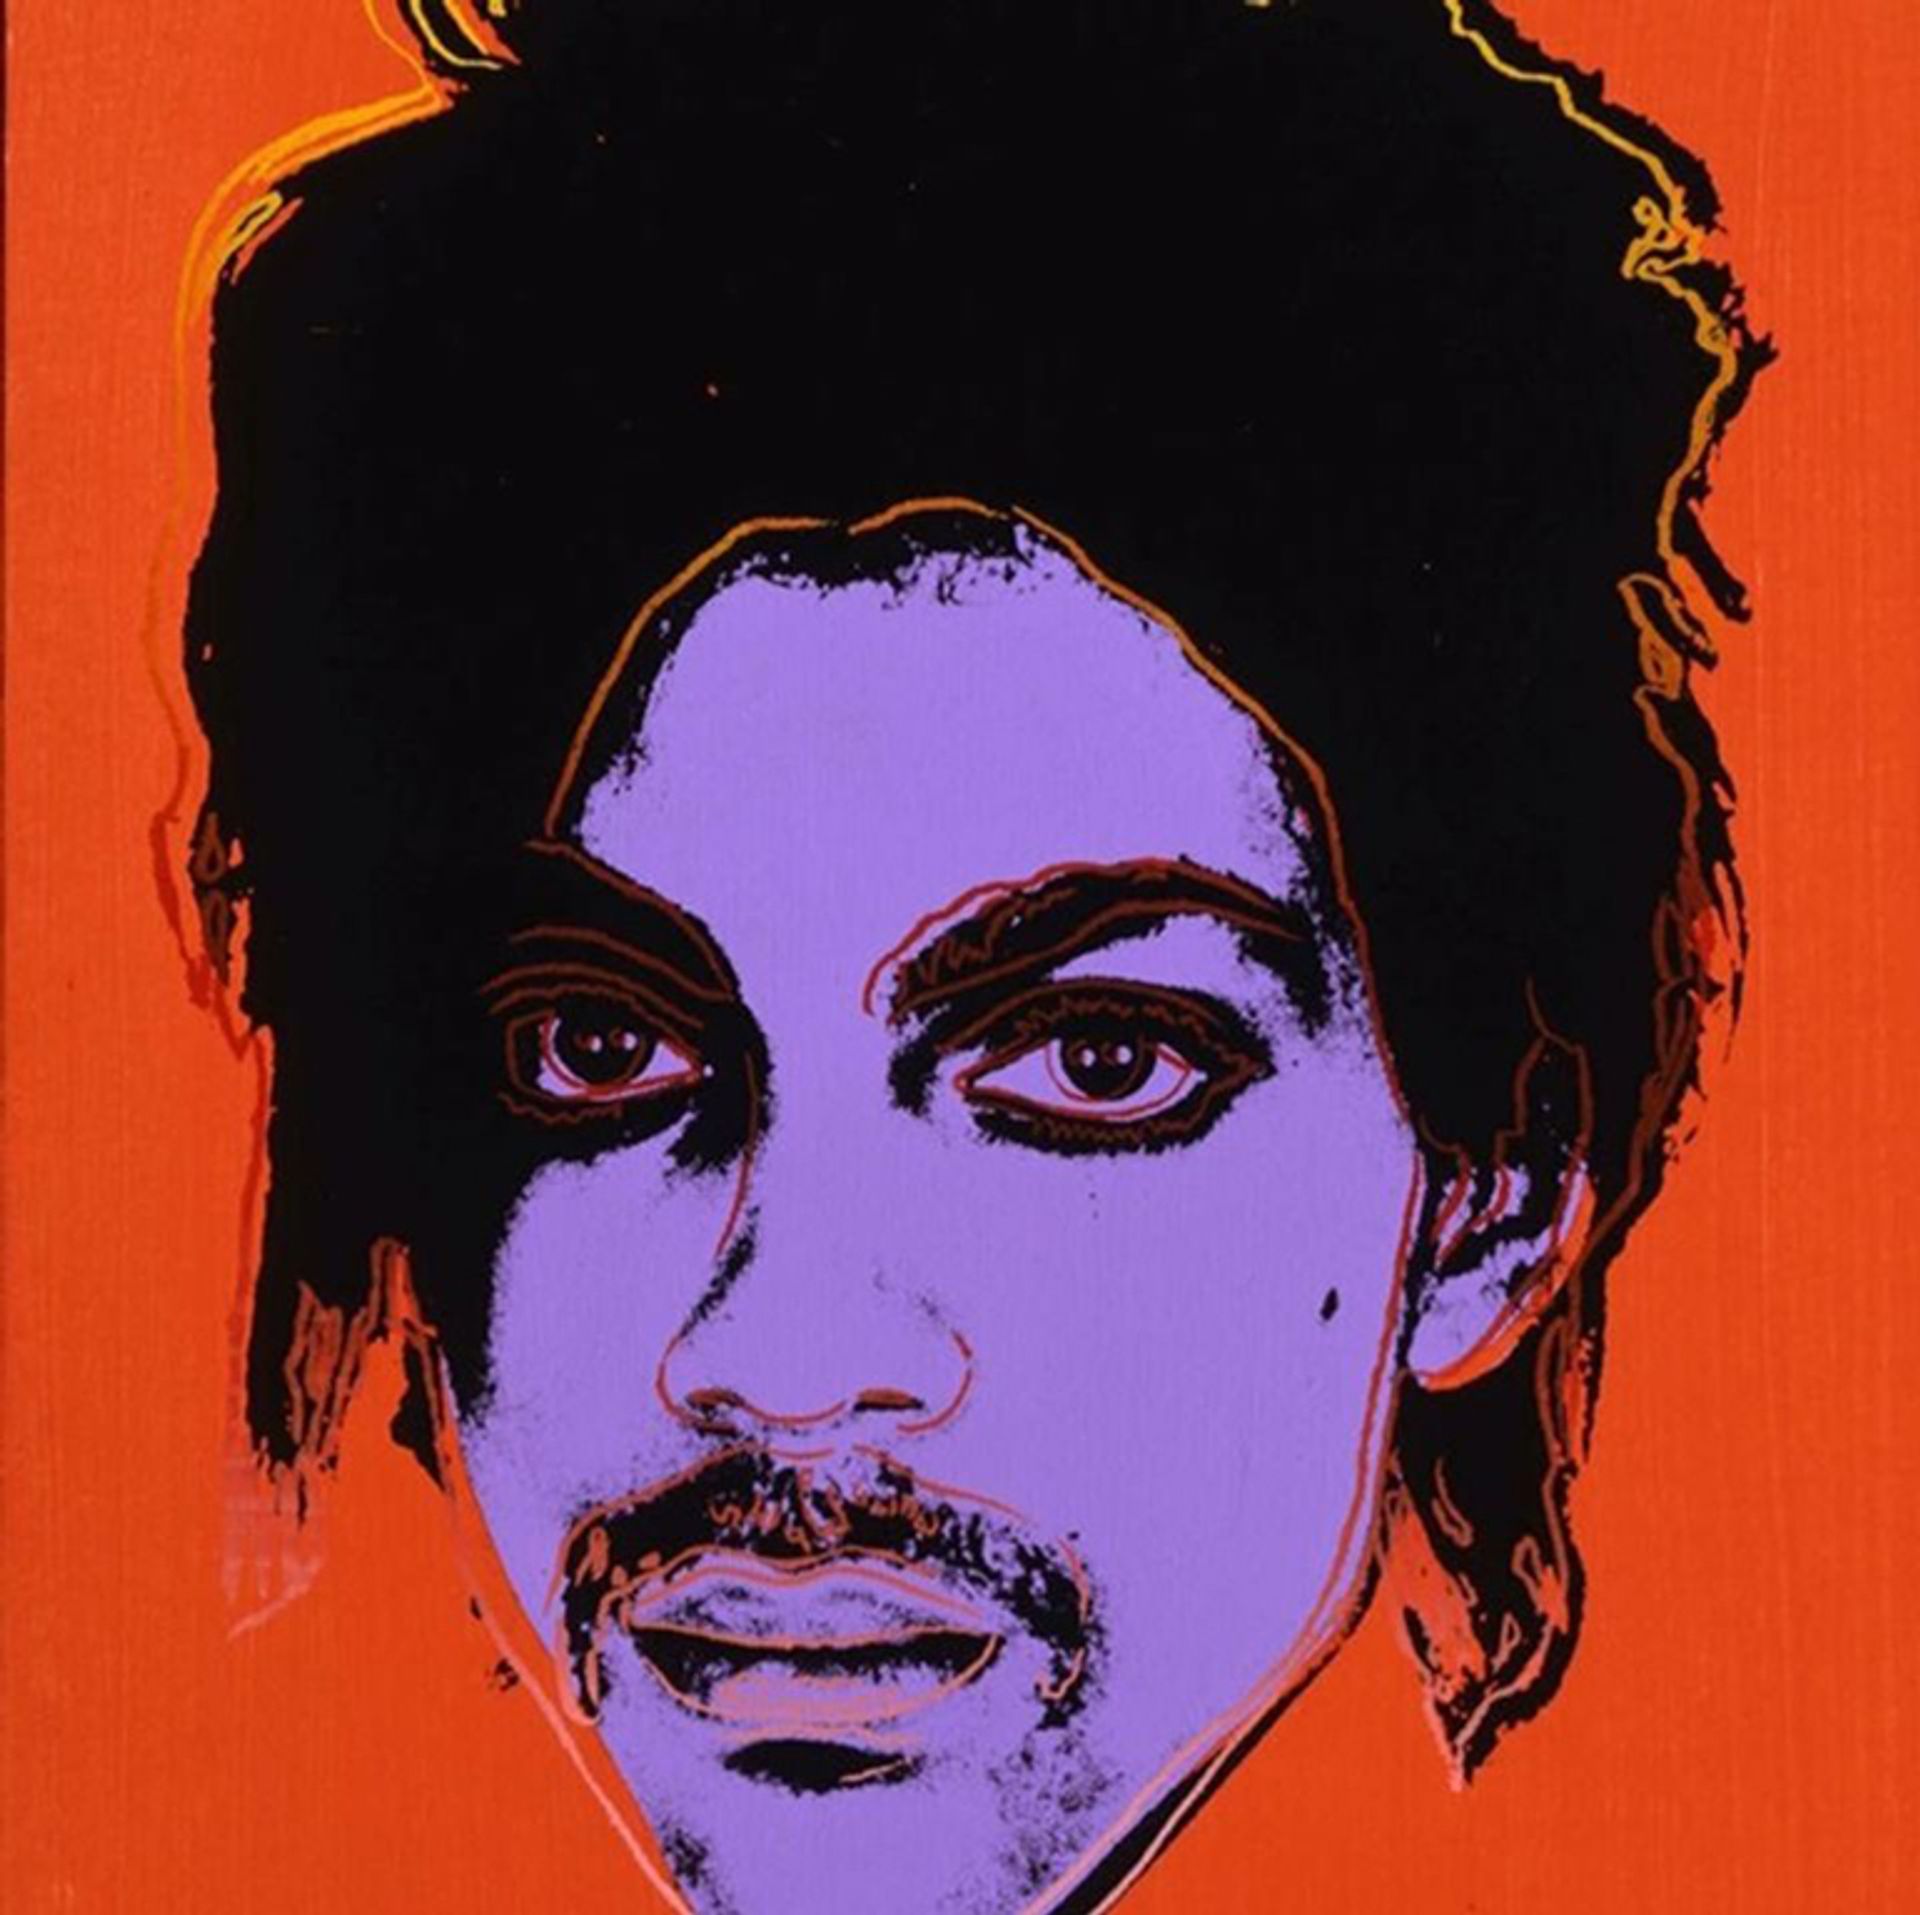 A portrait of Prince by Andy Warhol based on a photograph by Lynn Goldsmith 